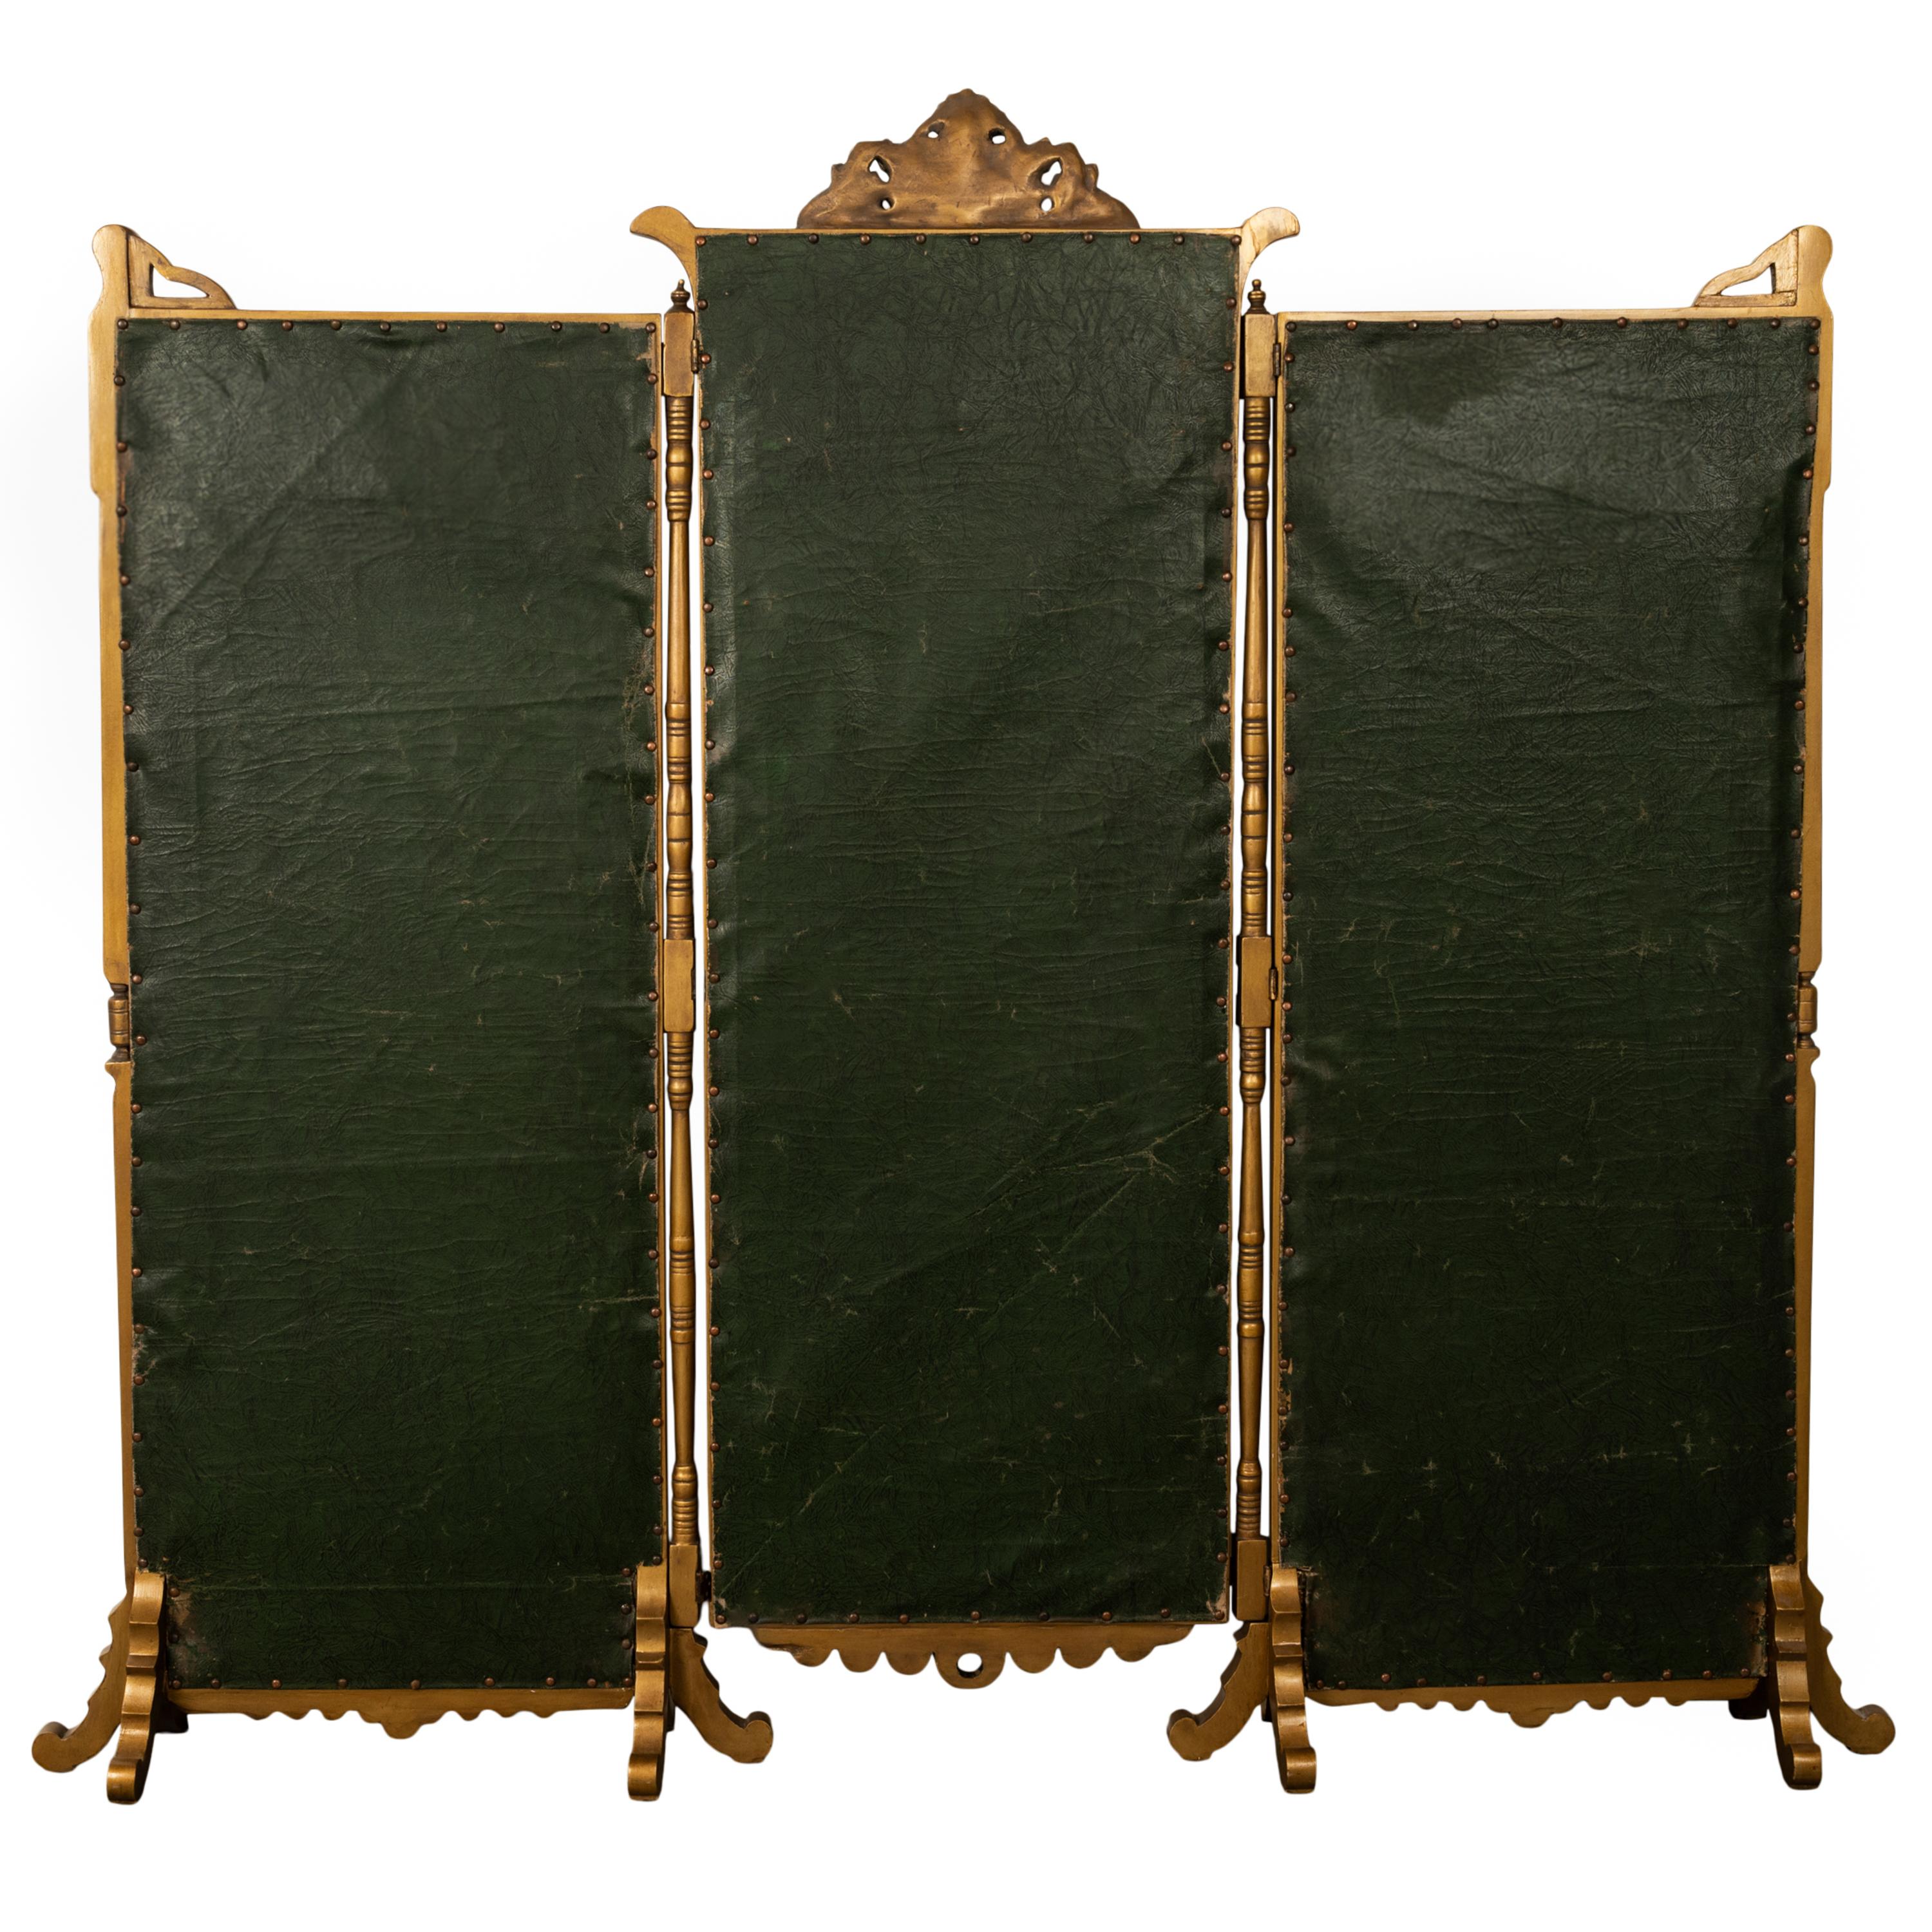  Antique Gilded Room Divider Screen Oil Painting Aesthetic Movement NY 1885 For Sale 5